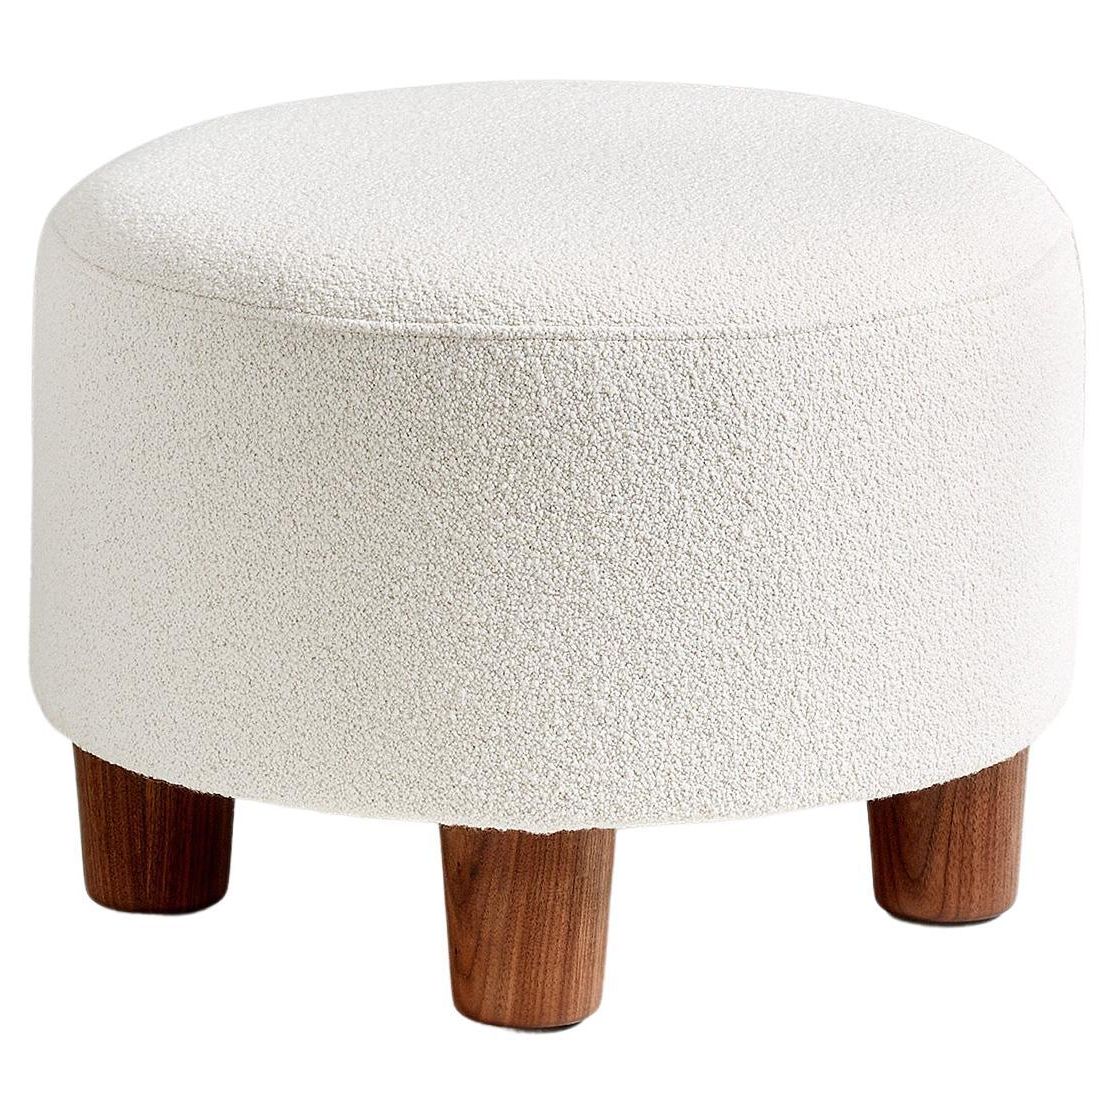 Walnut Round Ottomans In Famous Custom Made Round Boucle Ottoman With Walnut Legs For Sale At 1stdibs (View 1 of 15)